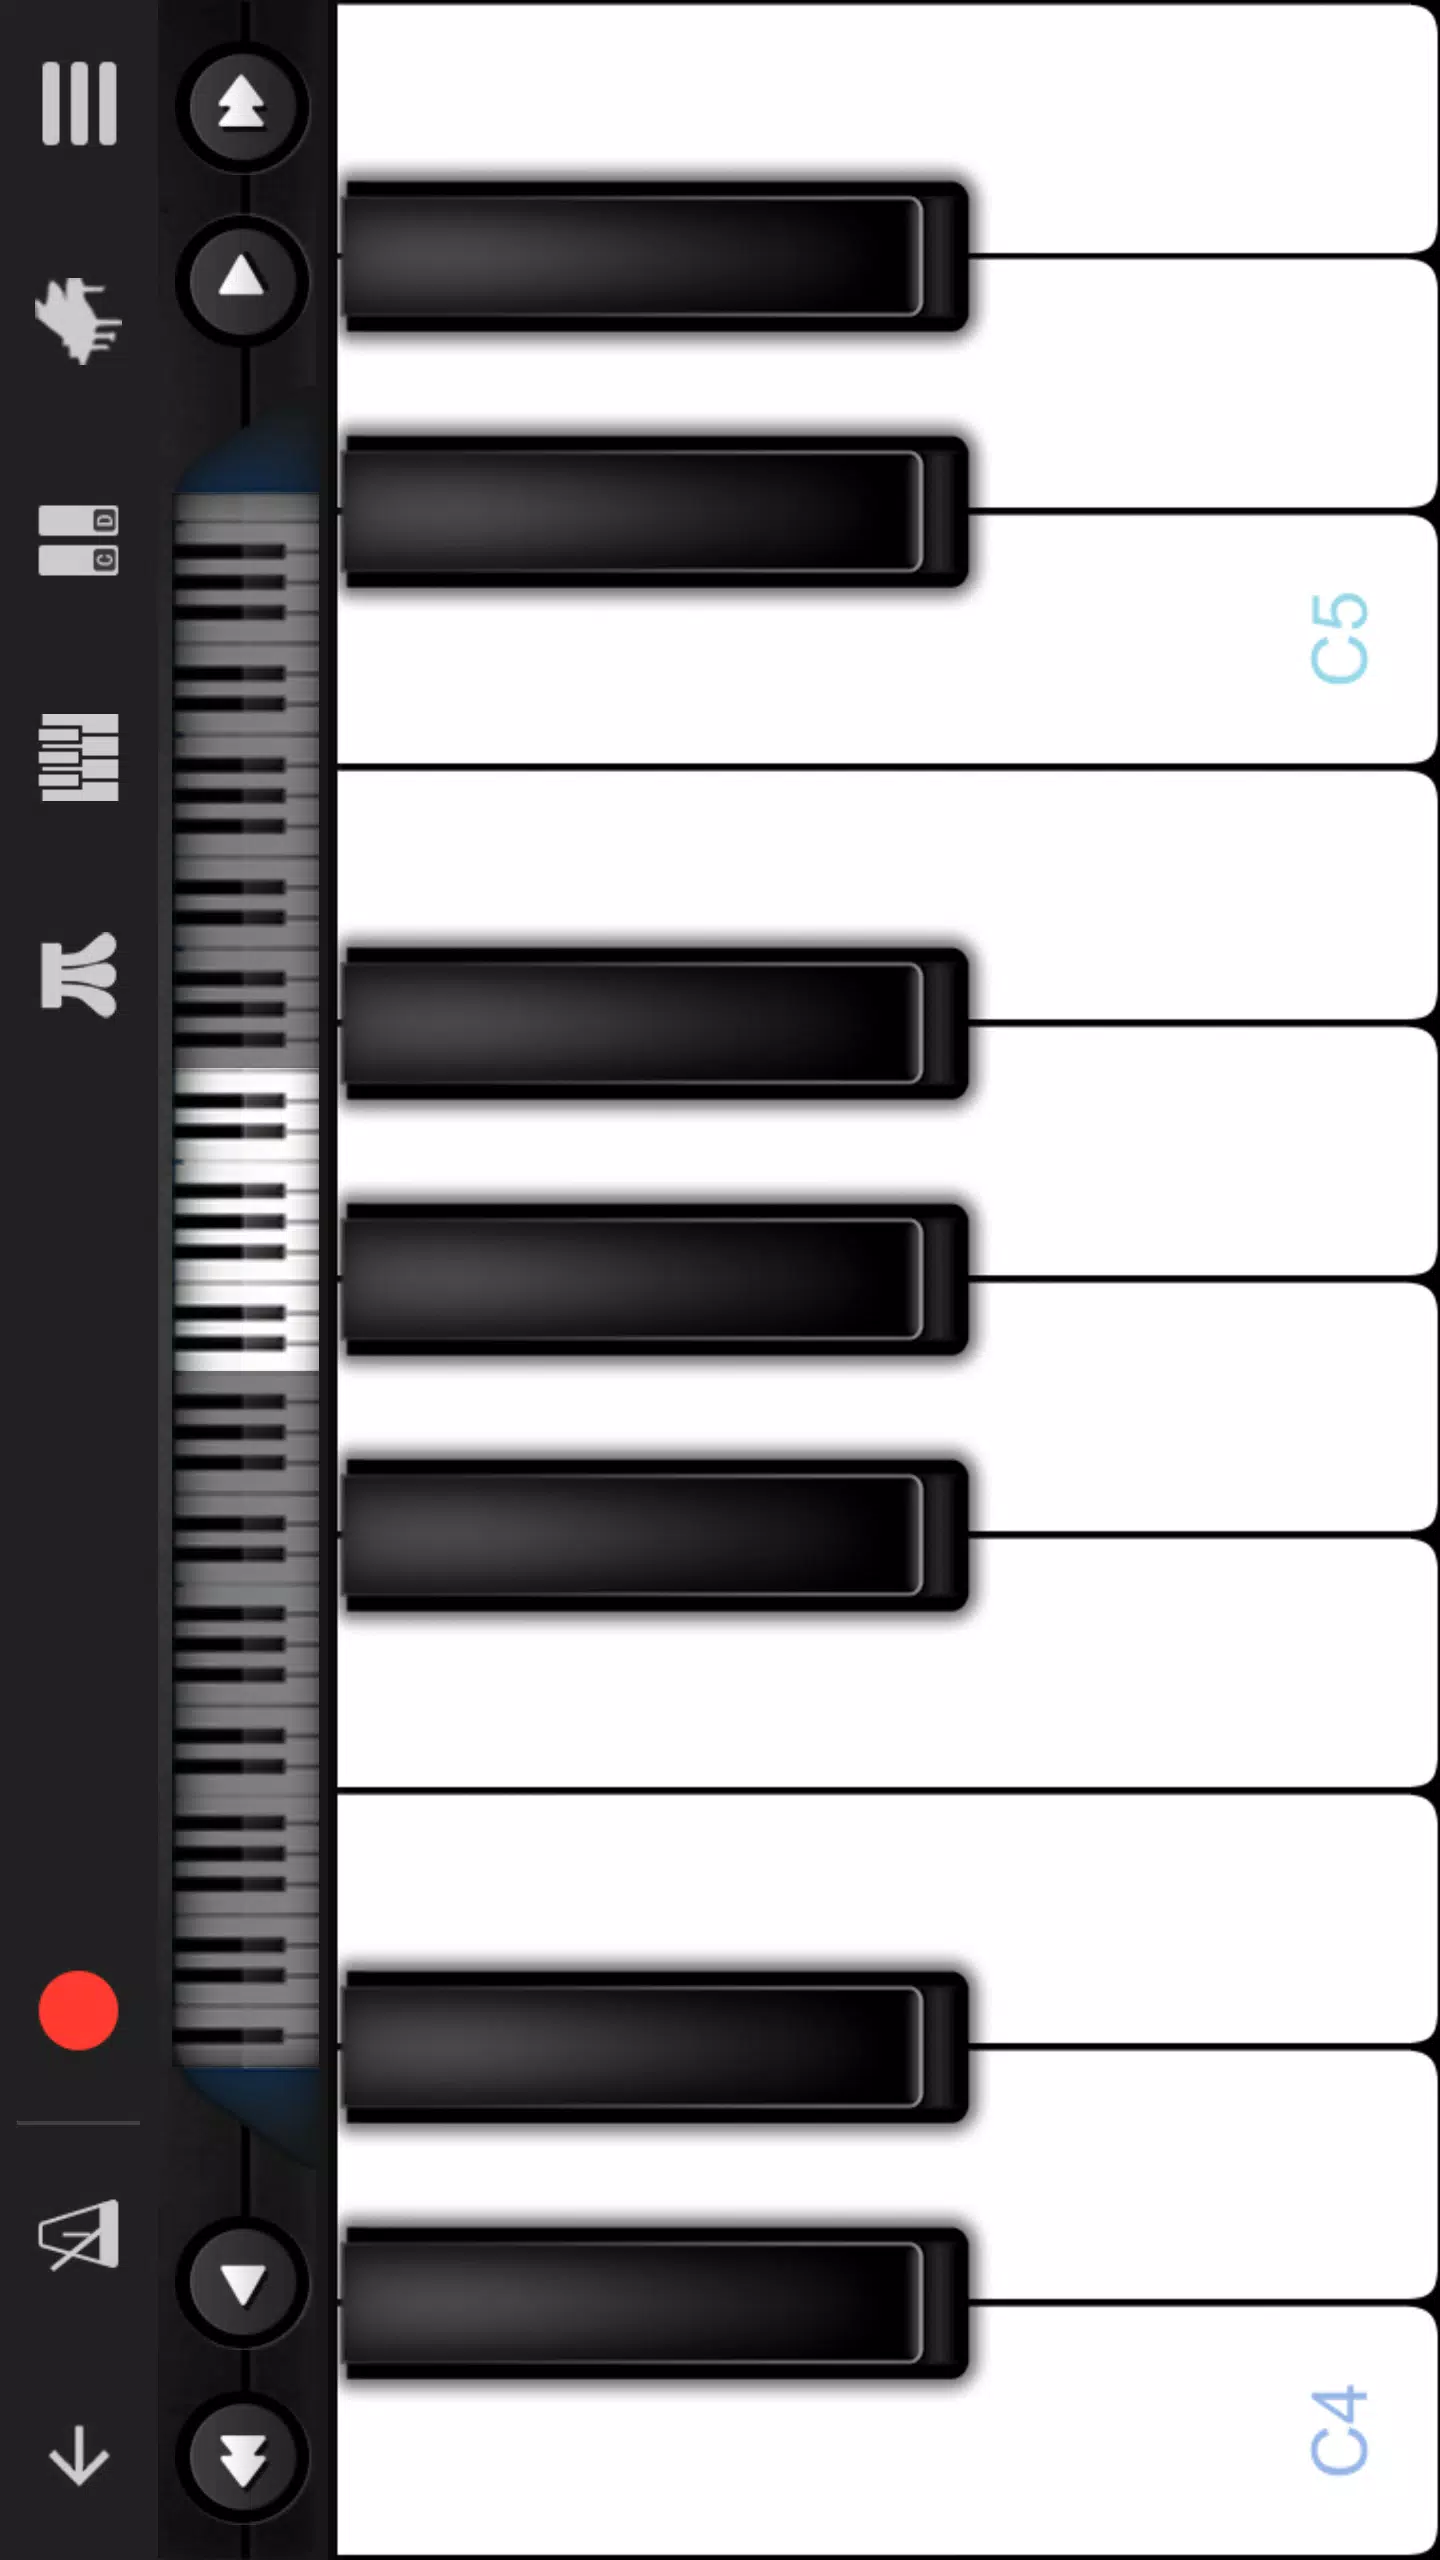 Multiplayer piano APK for Android Download